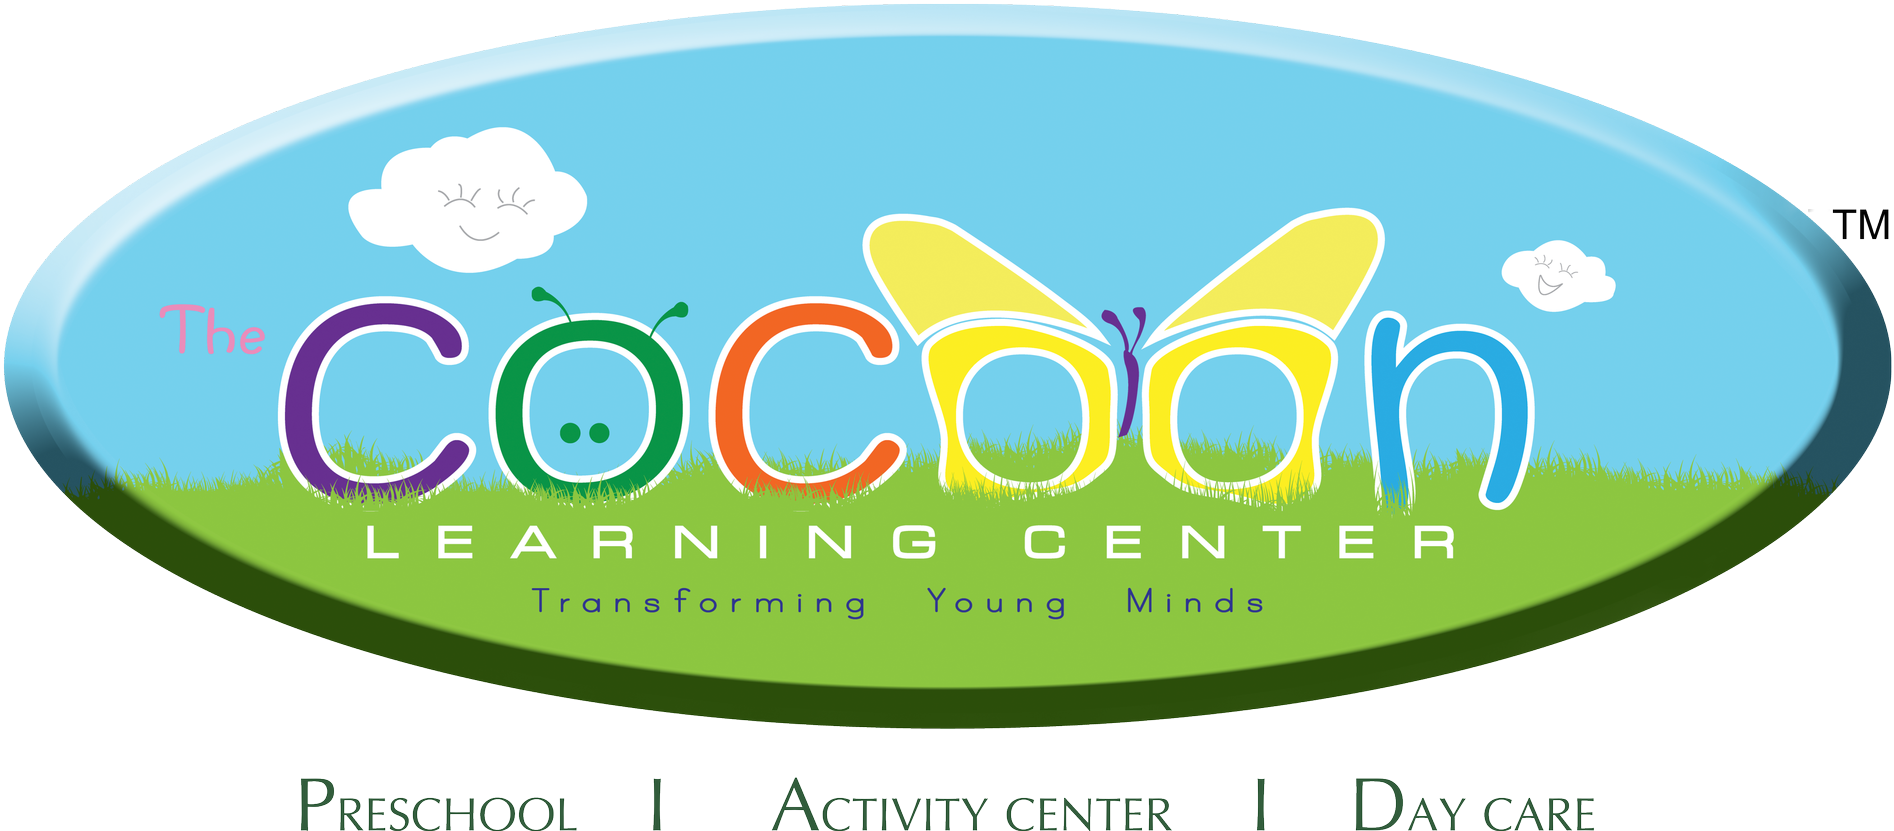 The Cocoon Learning Center - Cocoon Learning Center (1920x834)